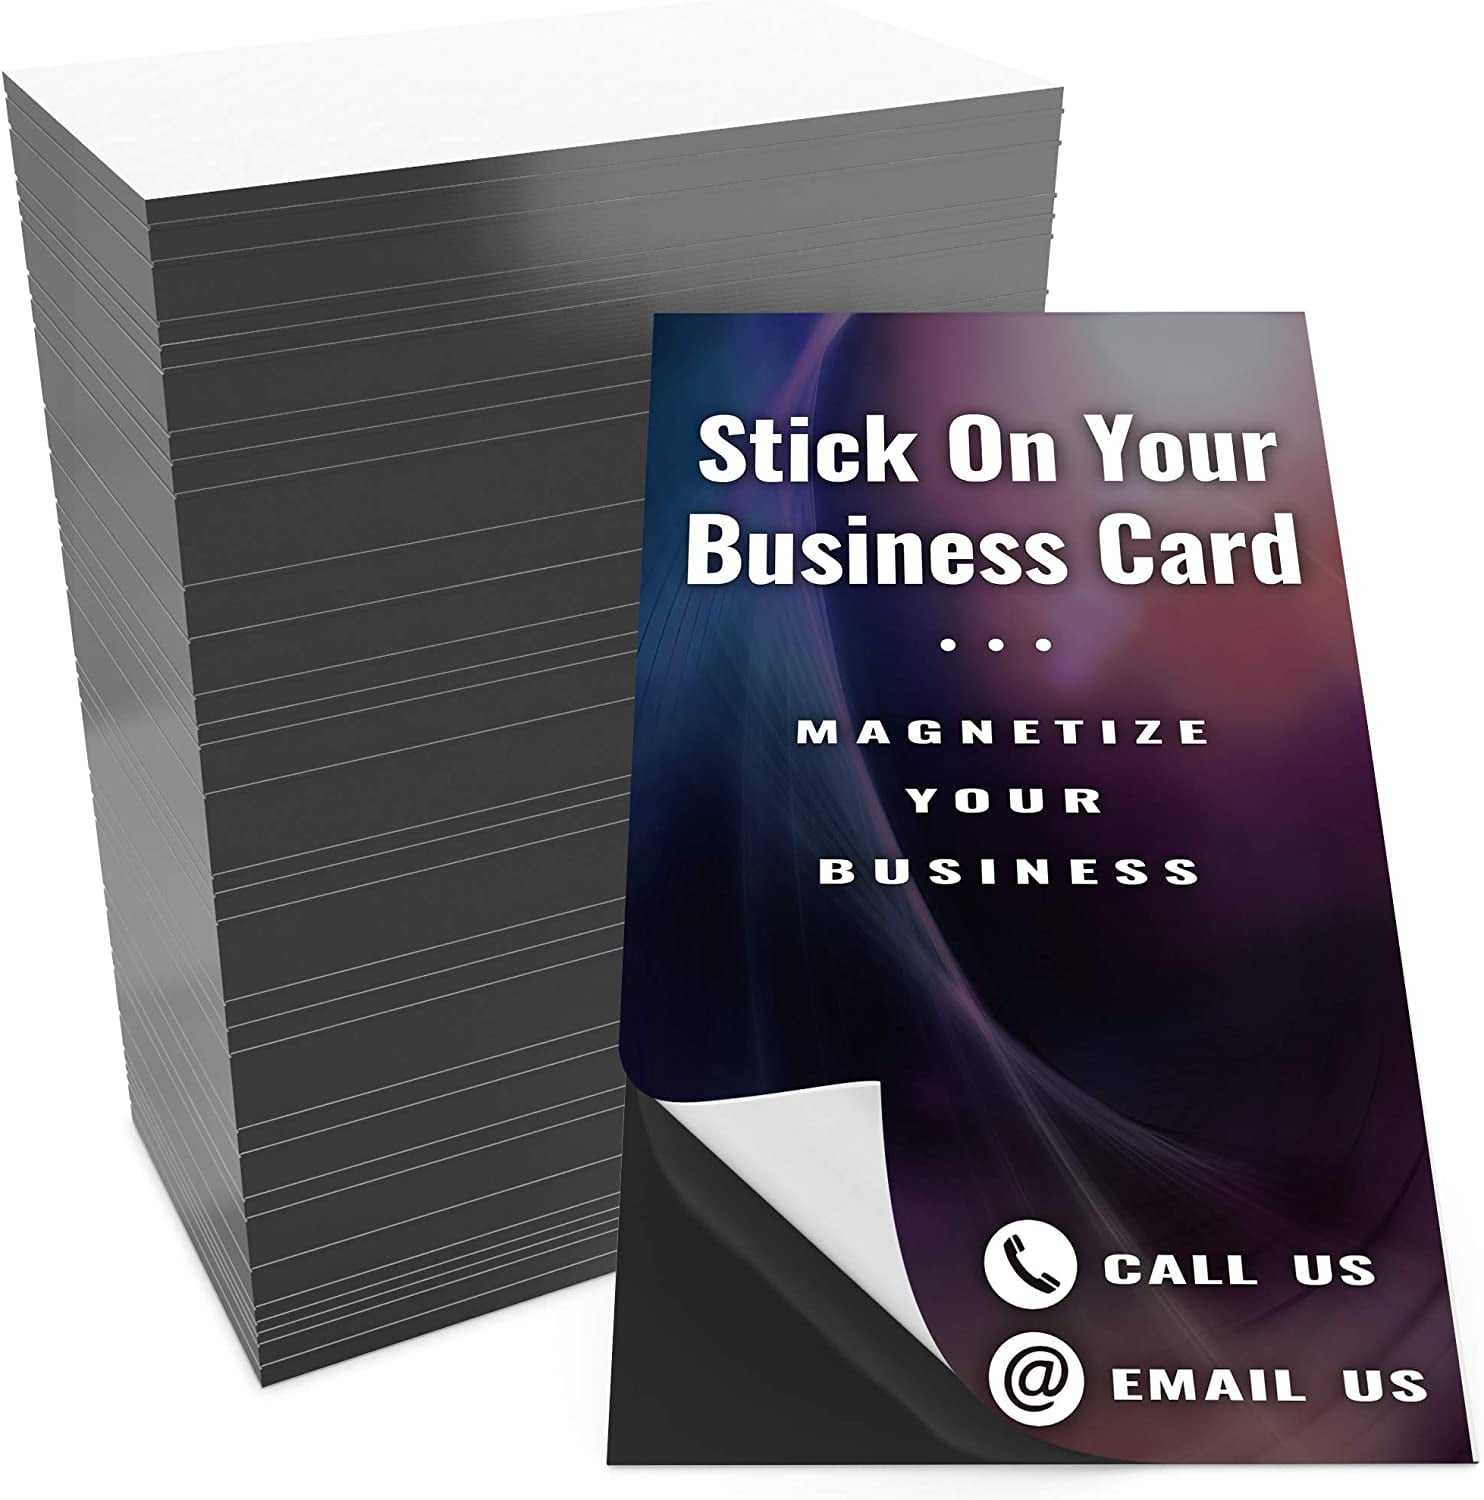 Retail Genius Pro-Grade Adhesive Business Card Magnet 50pk Blank Peel-and-Stick Magnetizers Turn Company Cards Into Magnetic Contact Info Strong Flexi